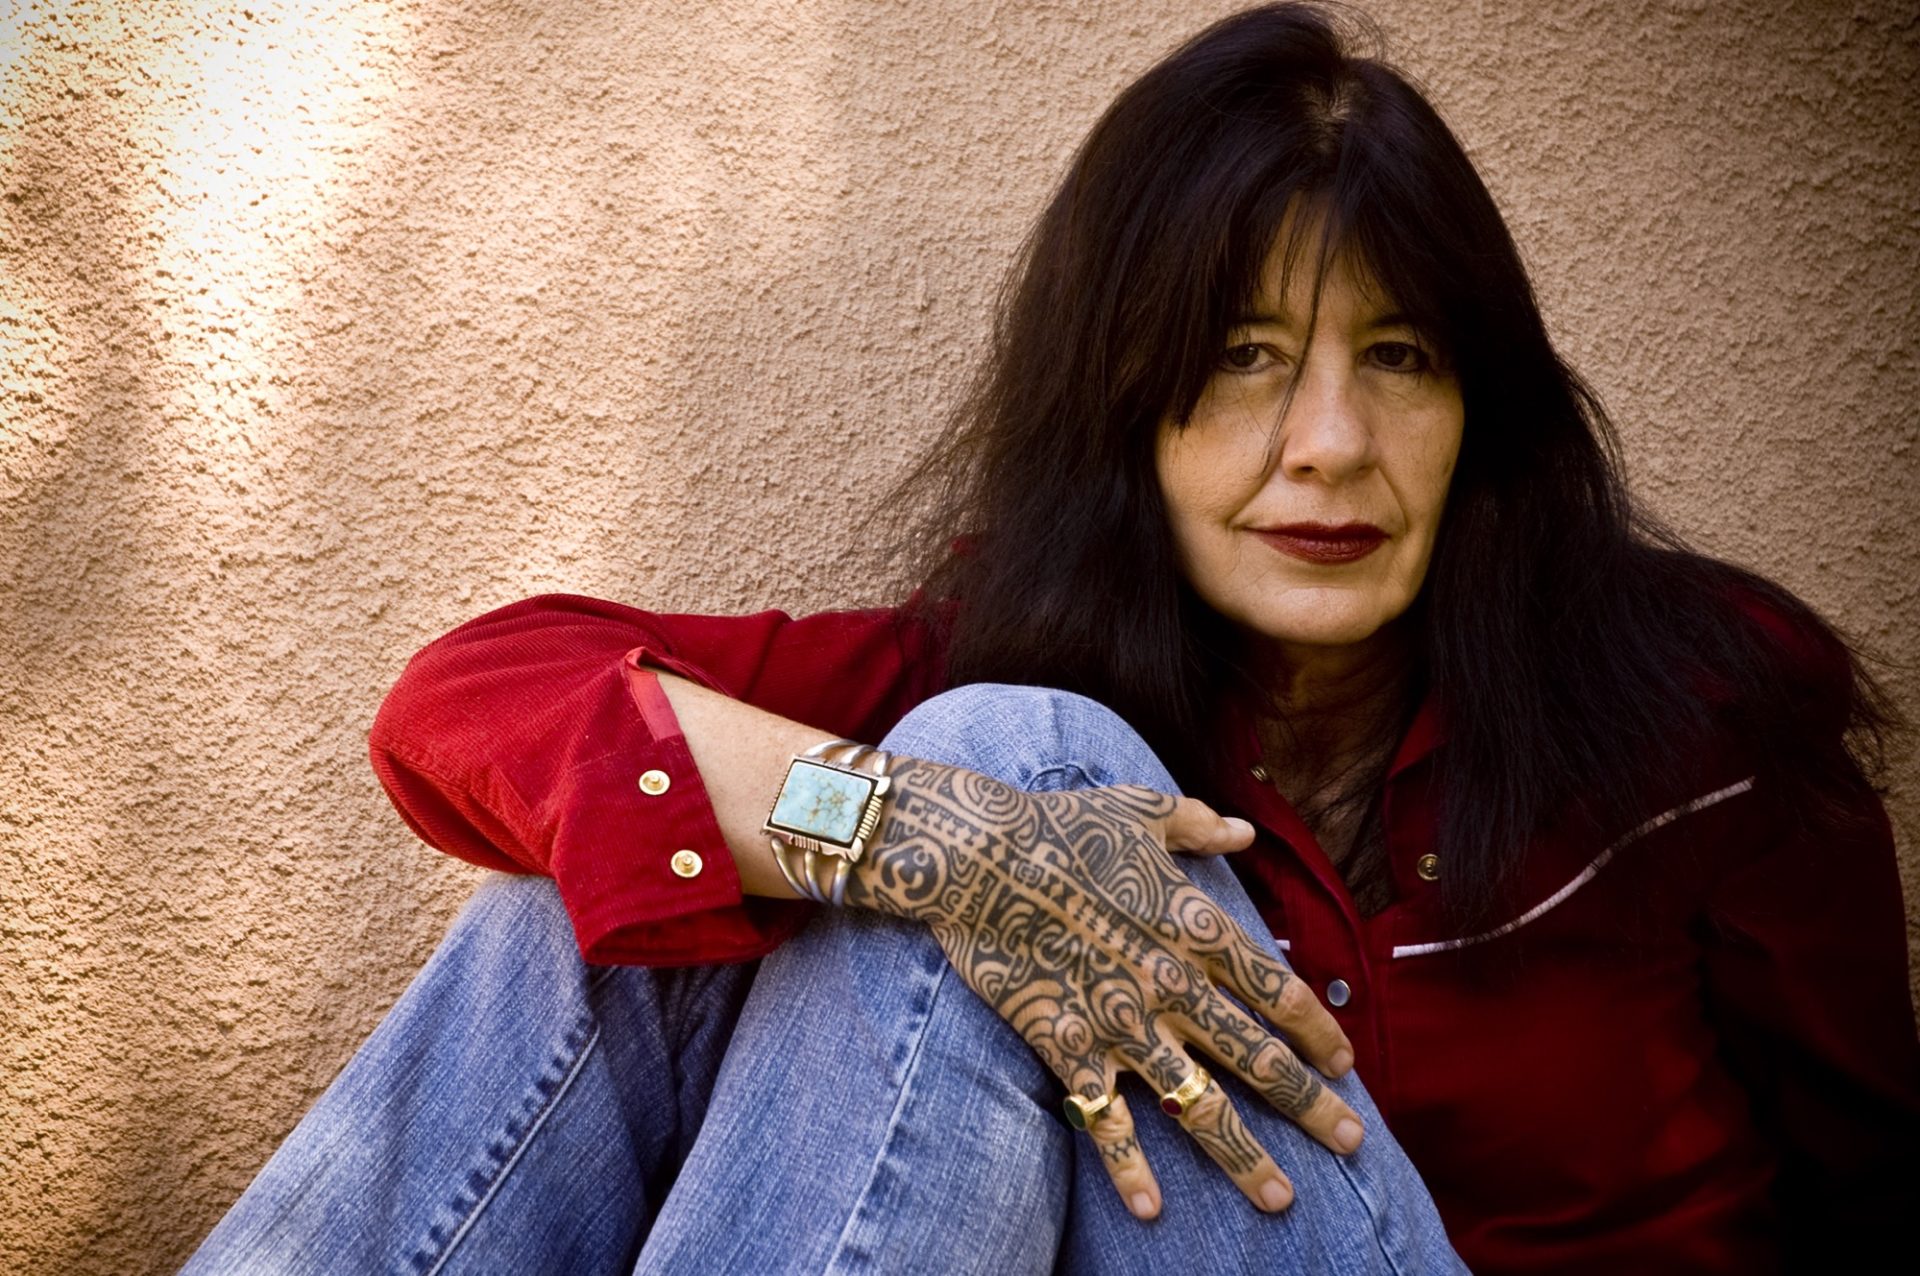 Native American woman sitting wearing a red shirt and blue jeans, her tattooed hand placed on her knee